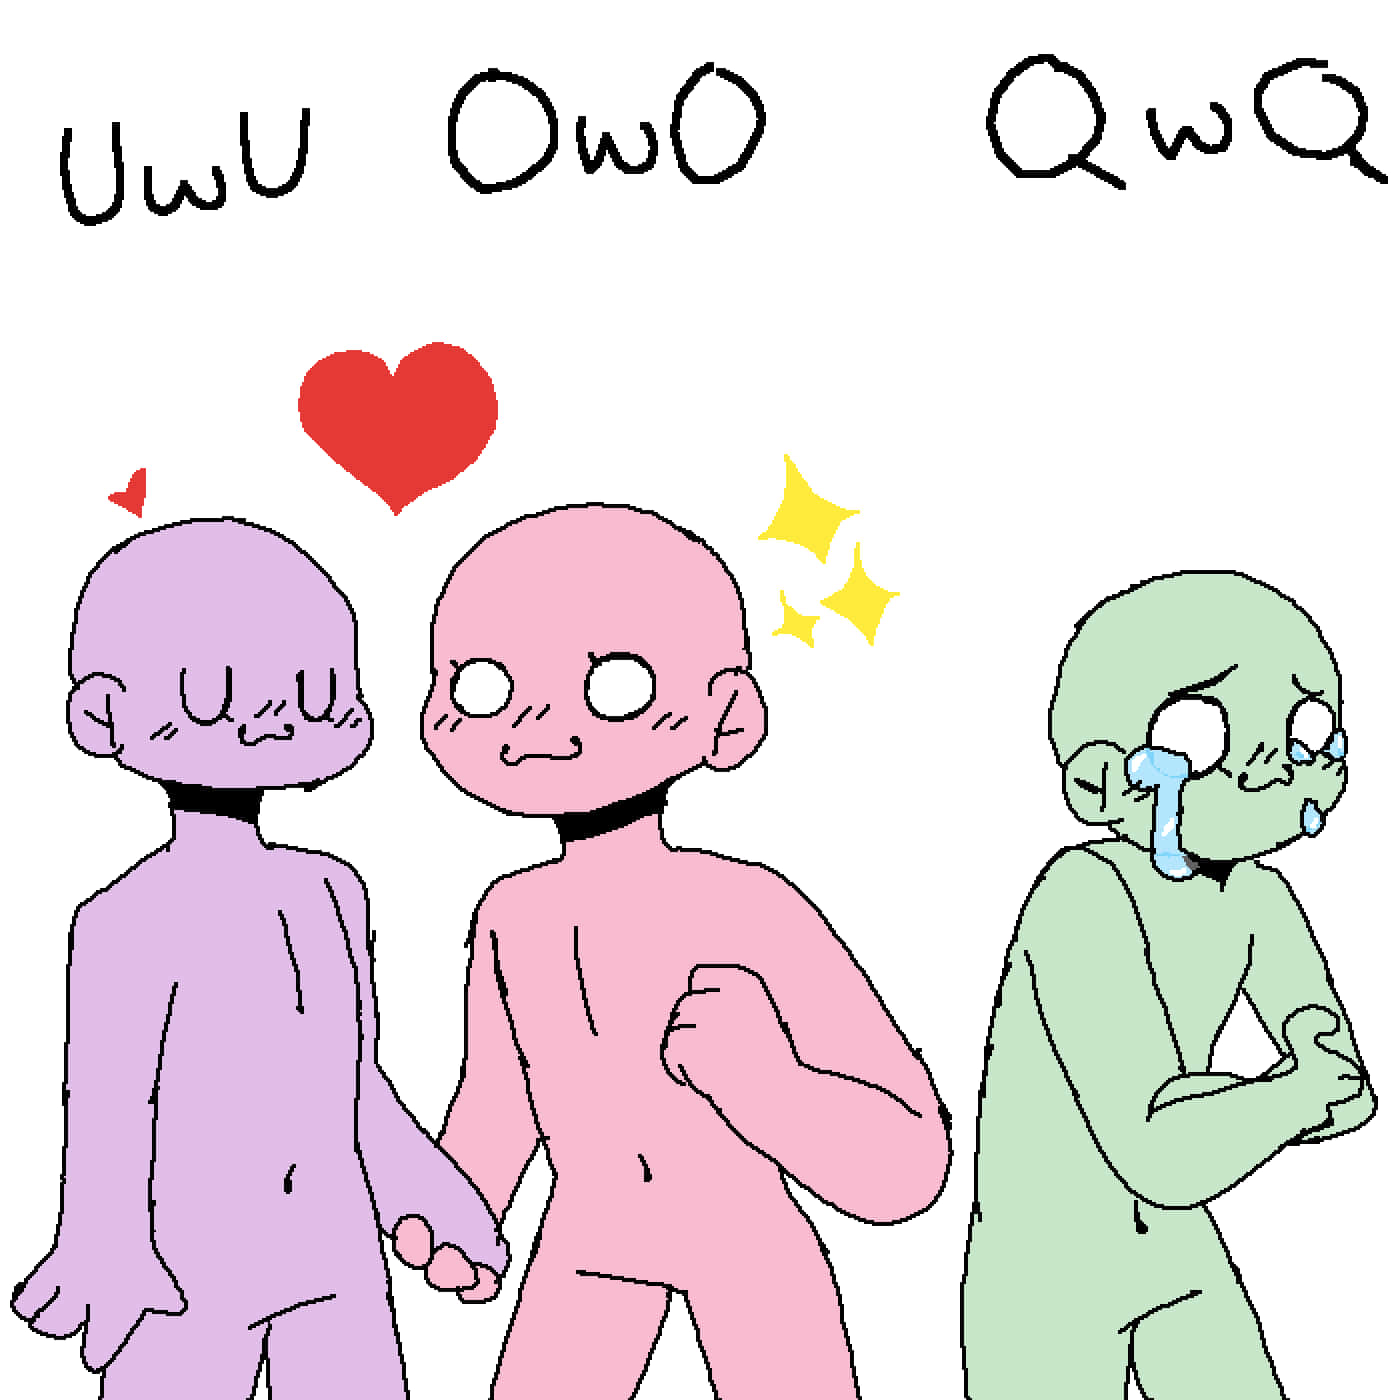 You won't be alone with Uwu! Wallpaper